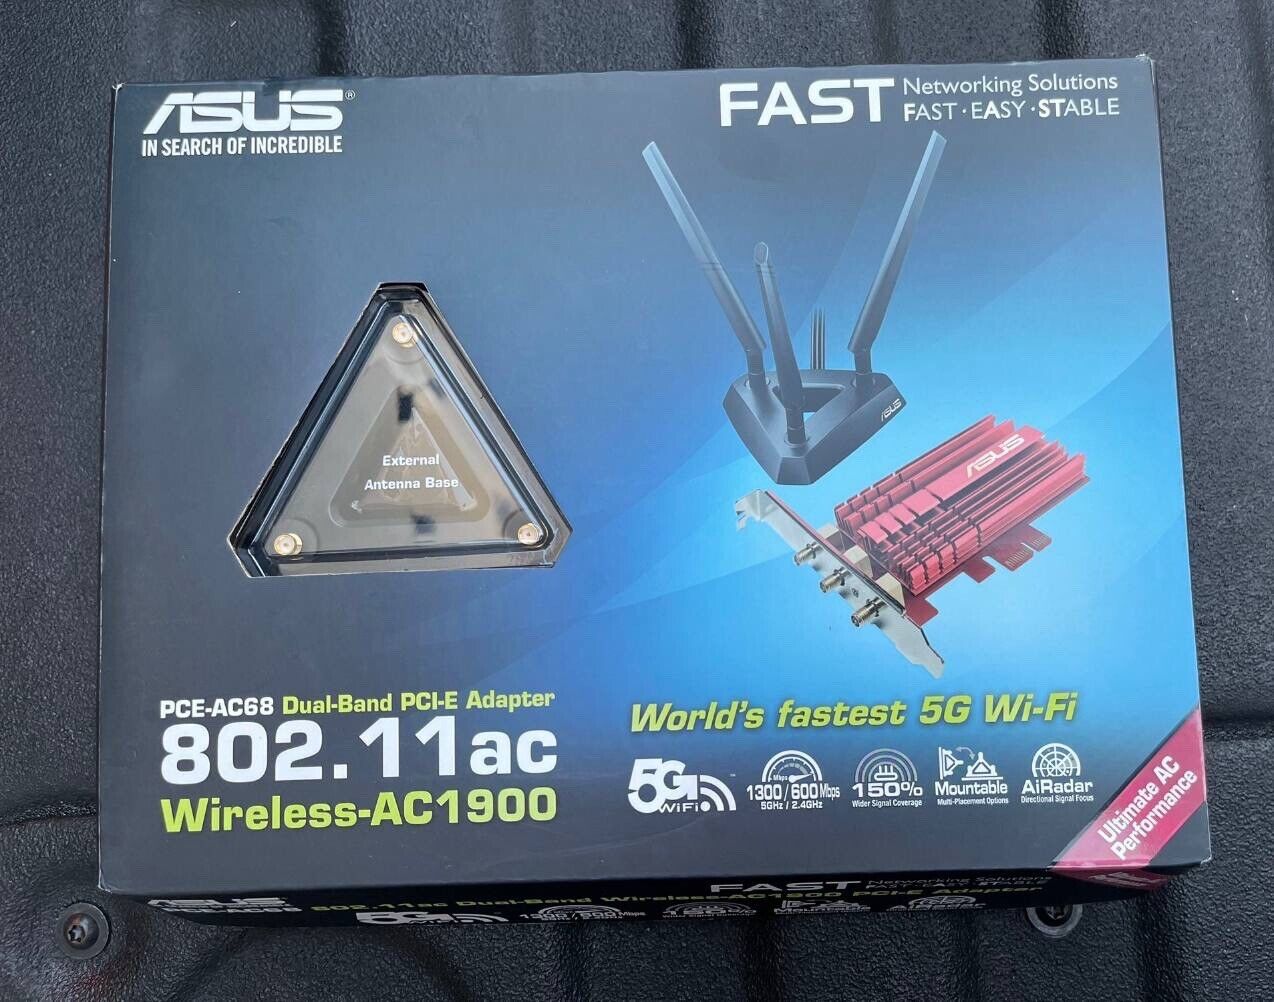 ASUS PCE-AC68 Dual-Band Wireless-AC1900 PCI-E Adapter Router